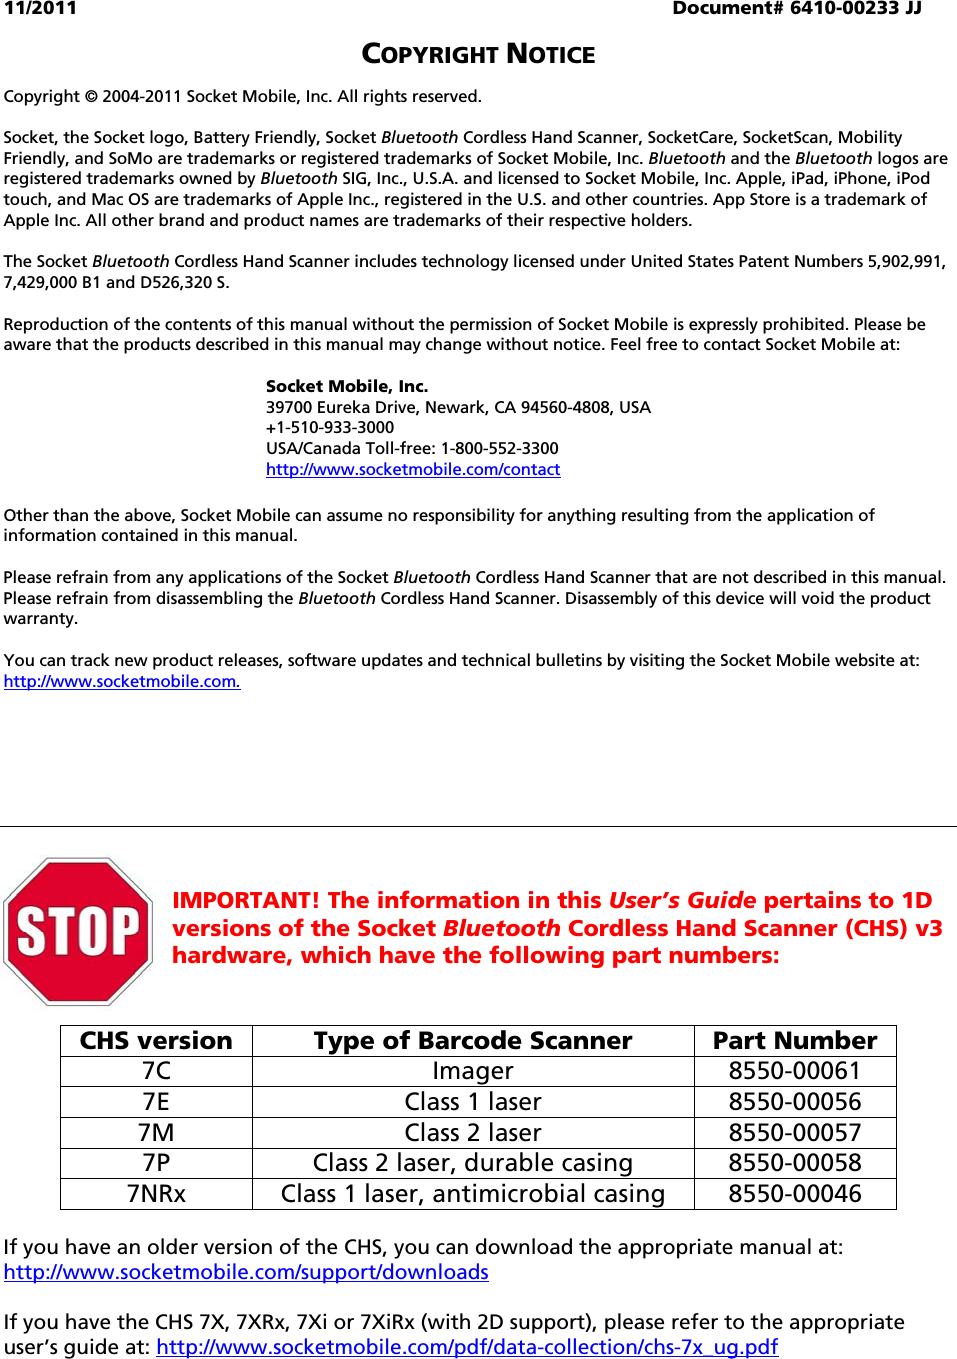 11/2011  Document# 6410-00233 JJ  COPYRIGHT NOTICE  Copyright © 2004-2011 Socket Mobile, Inc. All rights reserved.  Socket, the Socket logo, Battery Friendly, Socket Bluetooth Cordless Hand Scanner, SocketCare, SocketScan, Mobility Friendly, and SoMo are trademarks or registered trademarks of Socket Mobile, Inc. Bluetooth and the Bluetooth logos are registered trademarks owned by Bluetooth SIG, Inc., U.S.A. and licensed to Socket Mobile, Inc. Apple, iPad, iPhone, iPod touch, and Mac OS are trademarks of Apple Inc., registered in the U.S. and other countries. App Store is a trademark of Apple Inc. All other brand and product names are trademarks of their respective holders.  The Socket Bluetooth Cordless Hand Scanner includes technology licensed under United States Patent Numbers 5,902,991, 7,429,000 B1 and D526,320 S.  Reproduction of the contents of this manual without the permission of Socket Mobile is expressly prohibited. Please be aware that the products described in this manual may change without notice. Feel free to contact Socket Mobile at:  Socket Mobile, Inc.  39700 Eureka Drive, Newark, CA 94560-4808, USA +1-510-933-3000  USA/Canada Toll-free: 1-800-552-3300 http://www.socketmobile.com/contact  Other than the above, Socket Mobile can assume no responsibility for anything resulting from the application of information contained in this manual.  Please refrain from any applications of the Socket Bluetooth Cordless Hand Scanner that are not described in this manual. Please refrain from disassembling the Bluetooth Cordless Hand Scanner. Disassembly of this device will void the product warranty.  You can track new product releases, software updates and technical bulletins by visiting the Socket Mobile website at: http://www.socketmobile.com.           IMPORTANT! The information in this User’s Guide pertains to 1D versions of the Socket Bluetooth Cordless Hand Scanner (CHS) v3 hardware, which have the following part numbers:   CHS version  Type of Barcode Scanner  Part Number 7C Imager 8550-00061 7E  Class 1 laser  8550-00056 7M  Class 2 laser  8550-00057 7P  Class 2 laser, durable casing  8550-00058 7NRx  Class 1 laser, antimicrobial casing  8550-00046  If you have an older version of the CHS, you can download the appropriate manual at: http://www.socketmobile.com/support/downloads  If you have the CHS 7X, 7XRx, 7Xi or 7XiRx (with 2D support), please refer to the appropriate user’s guide at: http://www.socketmobile.com/pdf/data-collection/chs-7x_ug.pdf  